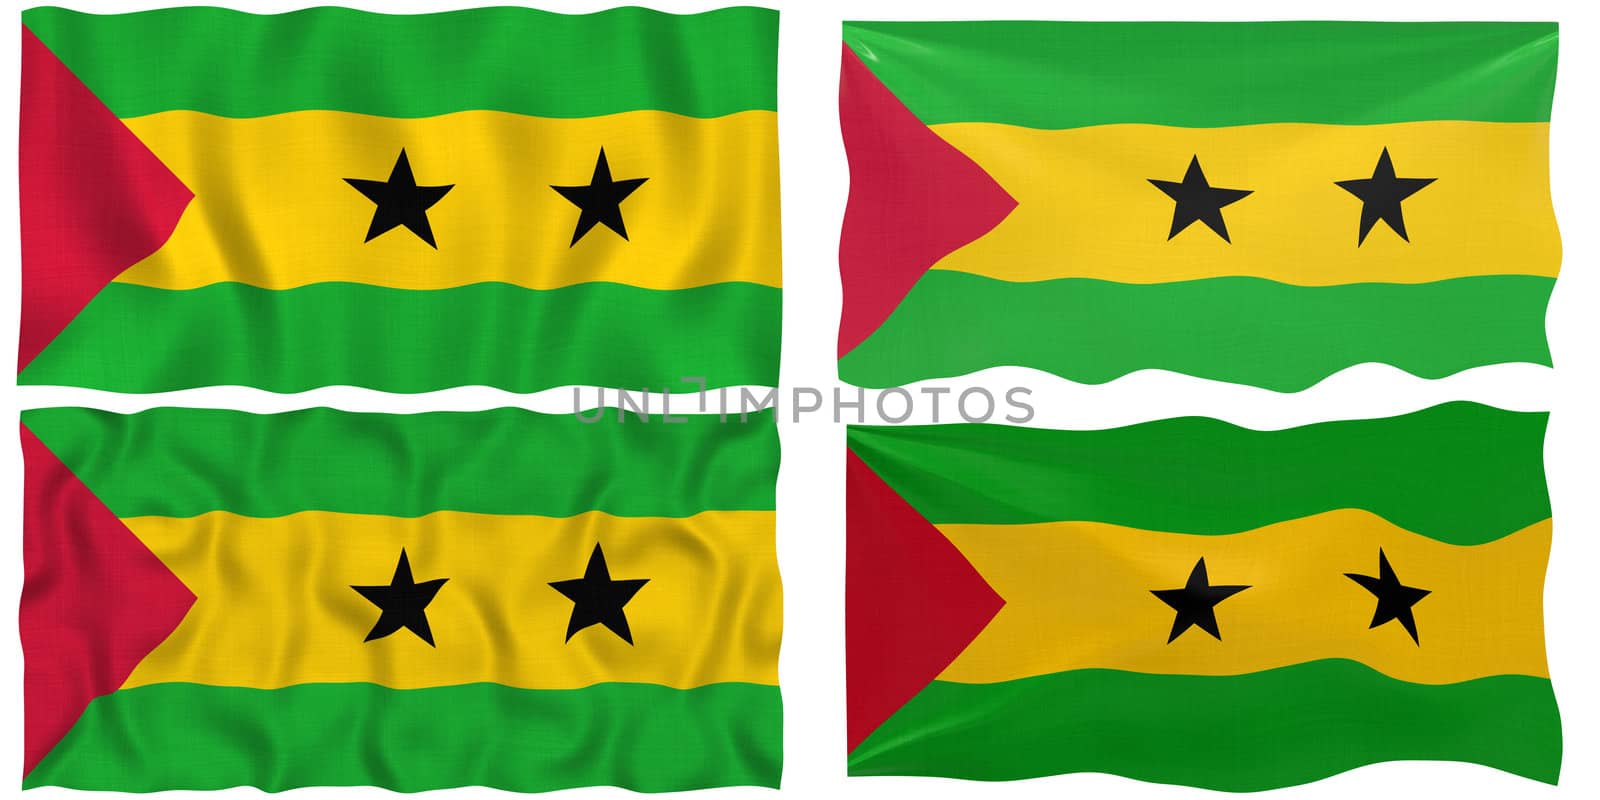 Flag of Sao Tome and Principe by clearviewstock